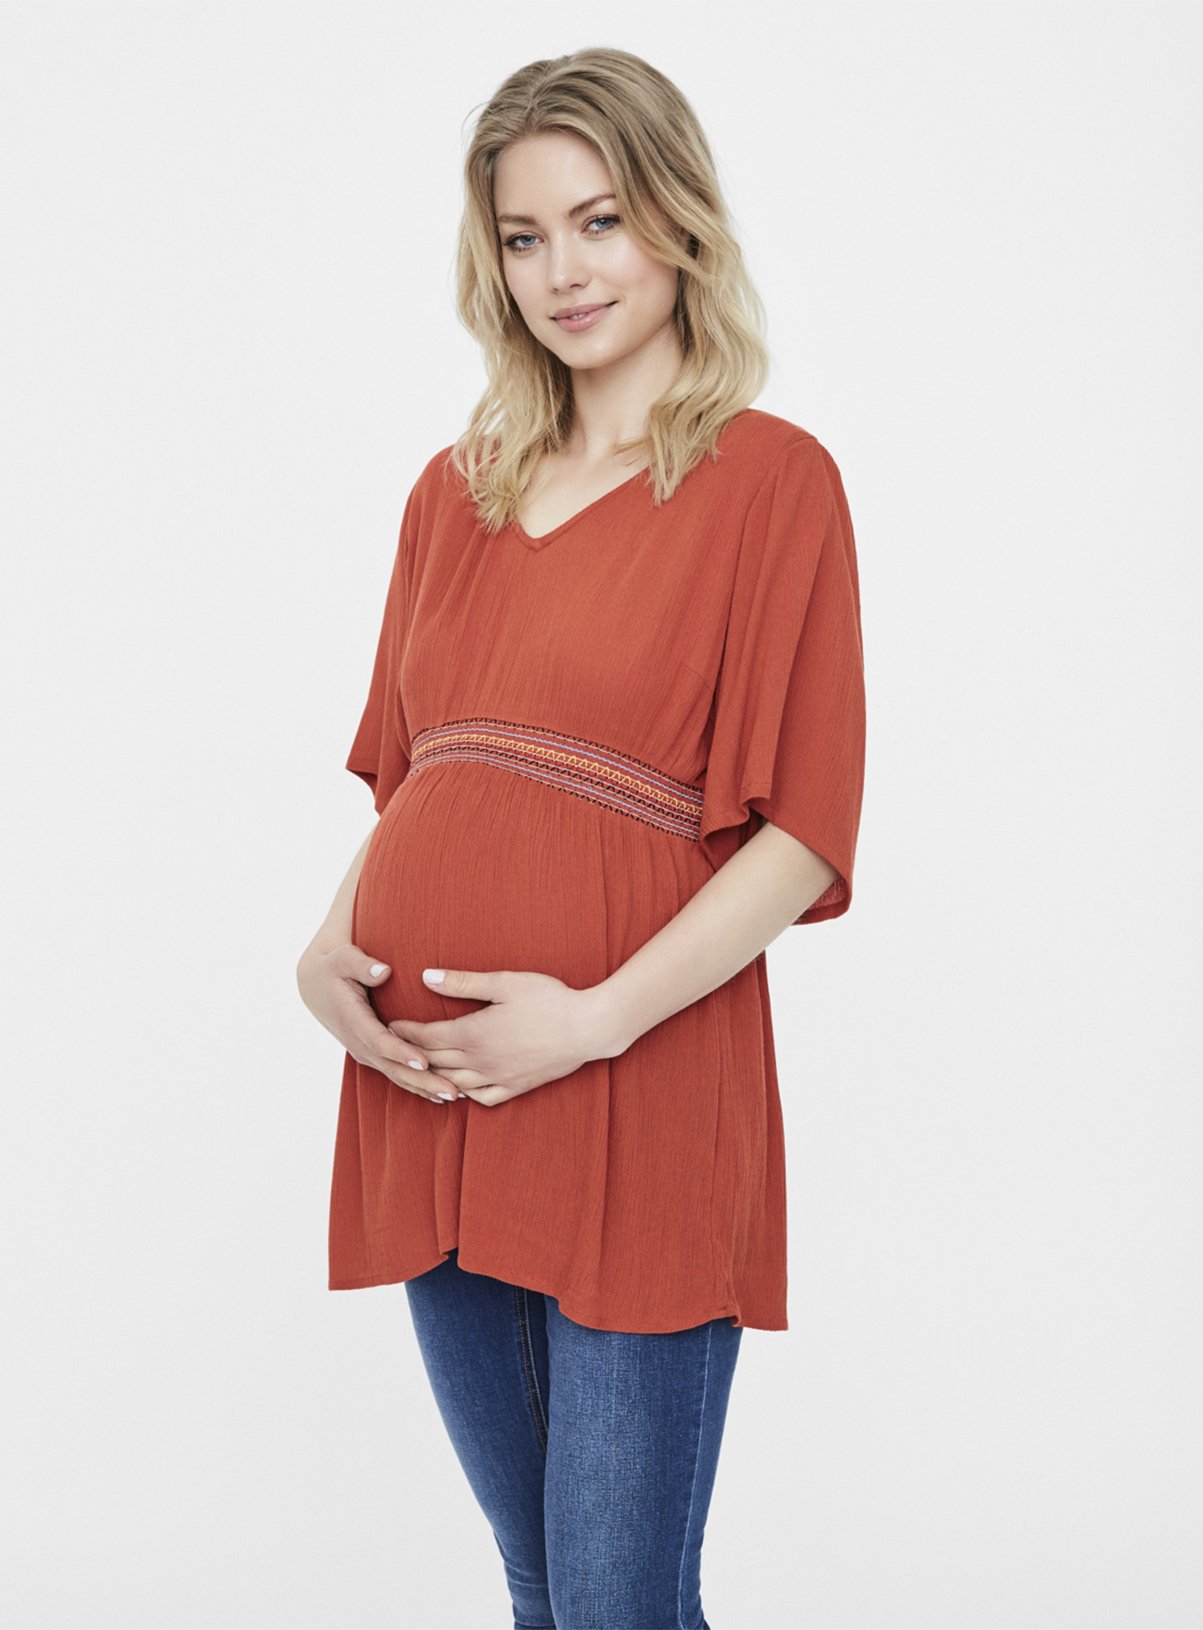 Red Woven Maternity Top Review